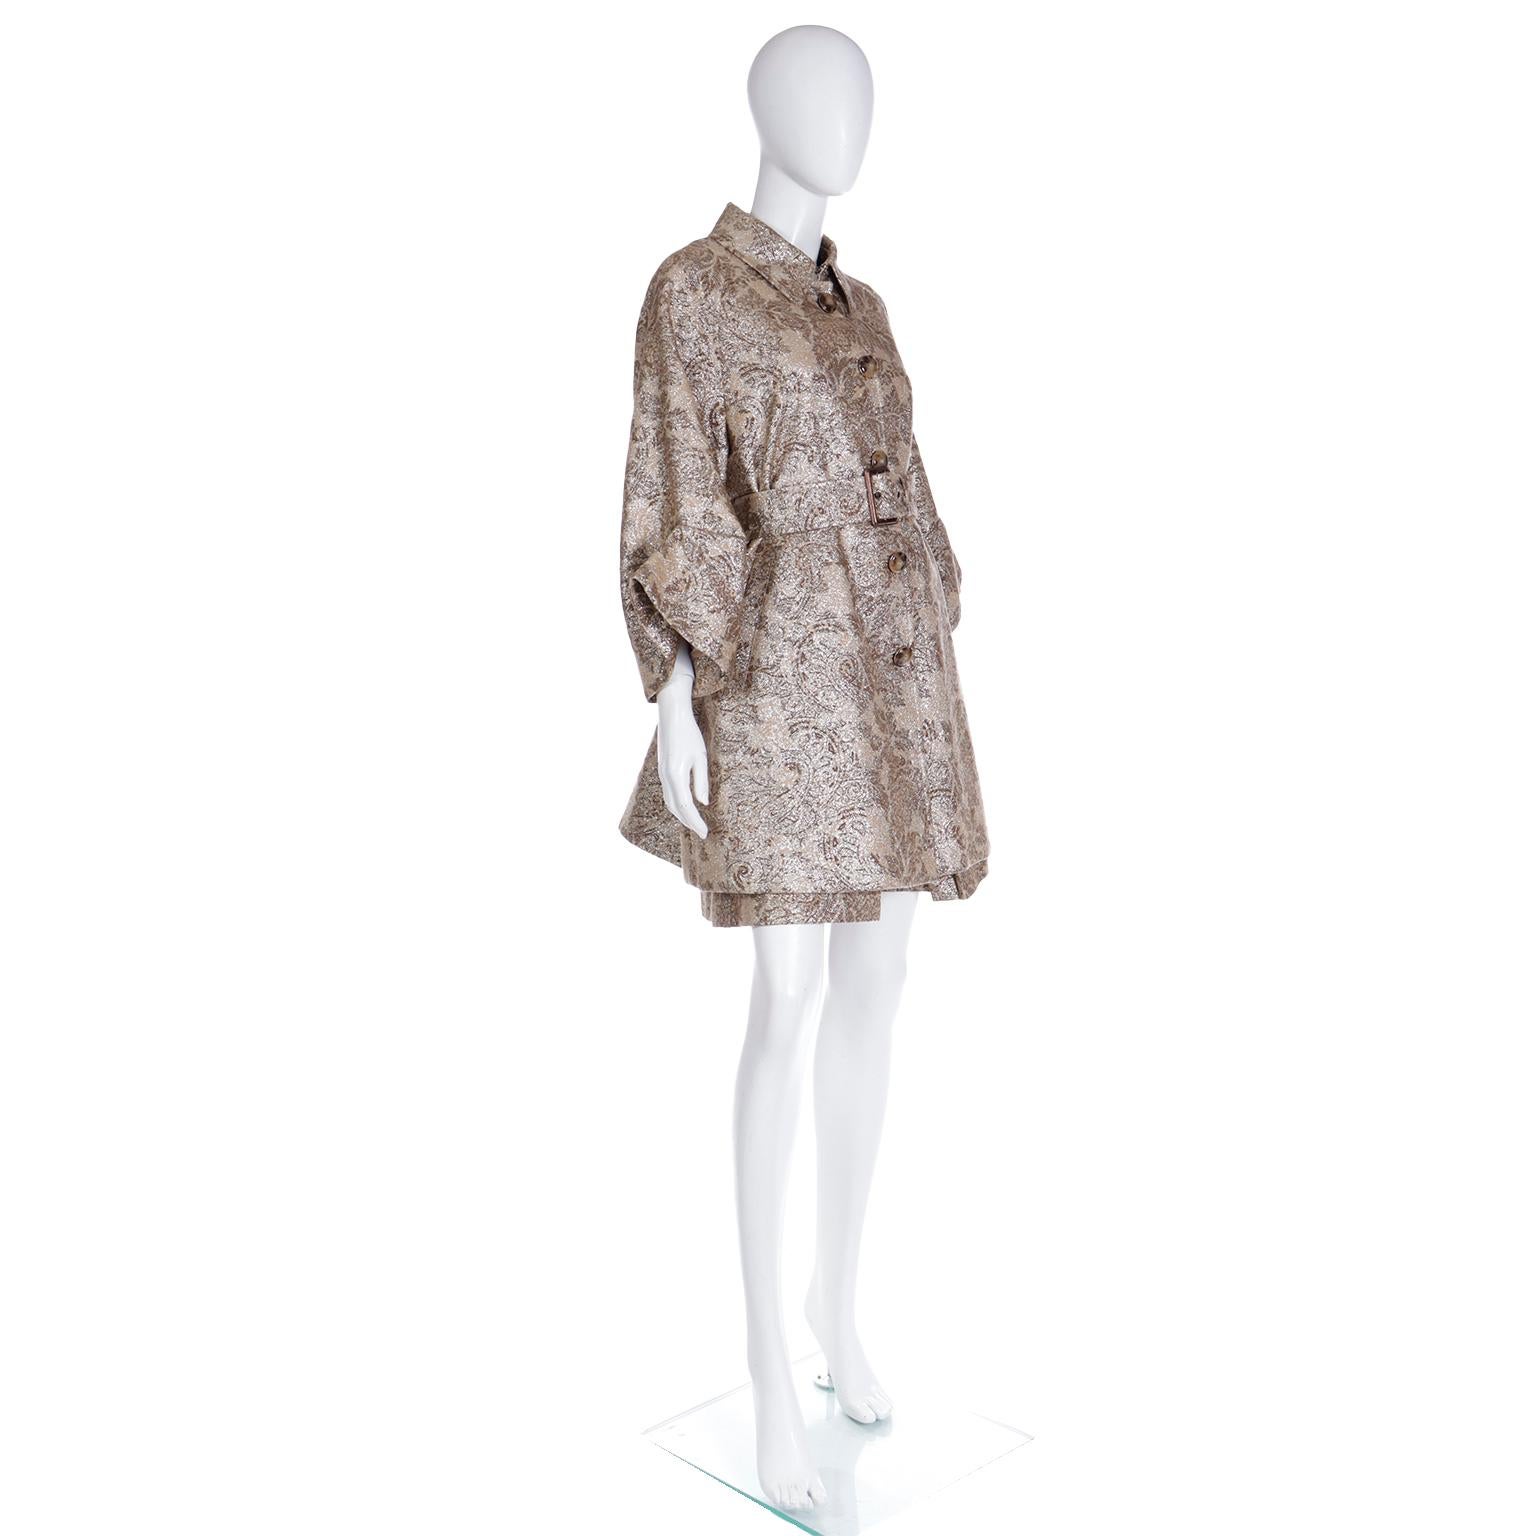 D&G Dolce & Gabbana Gold Floral Dress and Coat With Belt Amy Winehouse 2007 For Sale 6